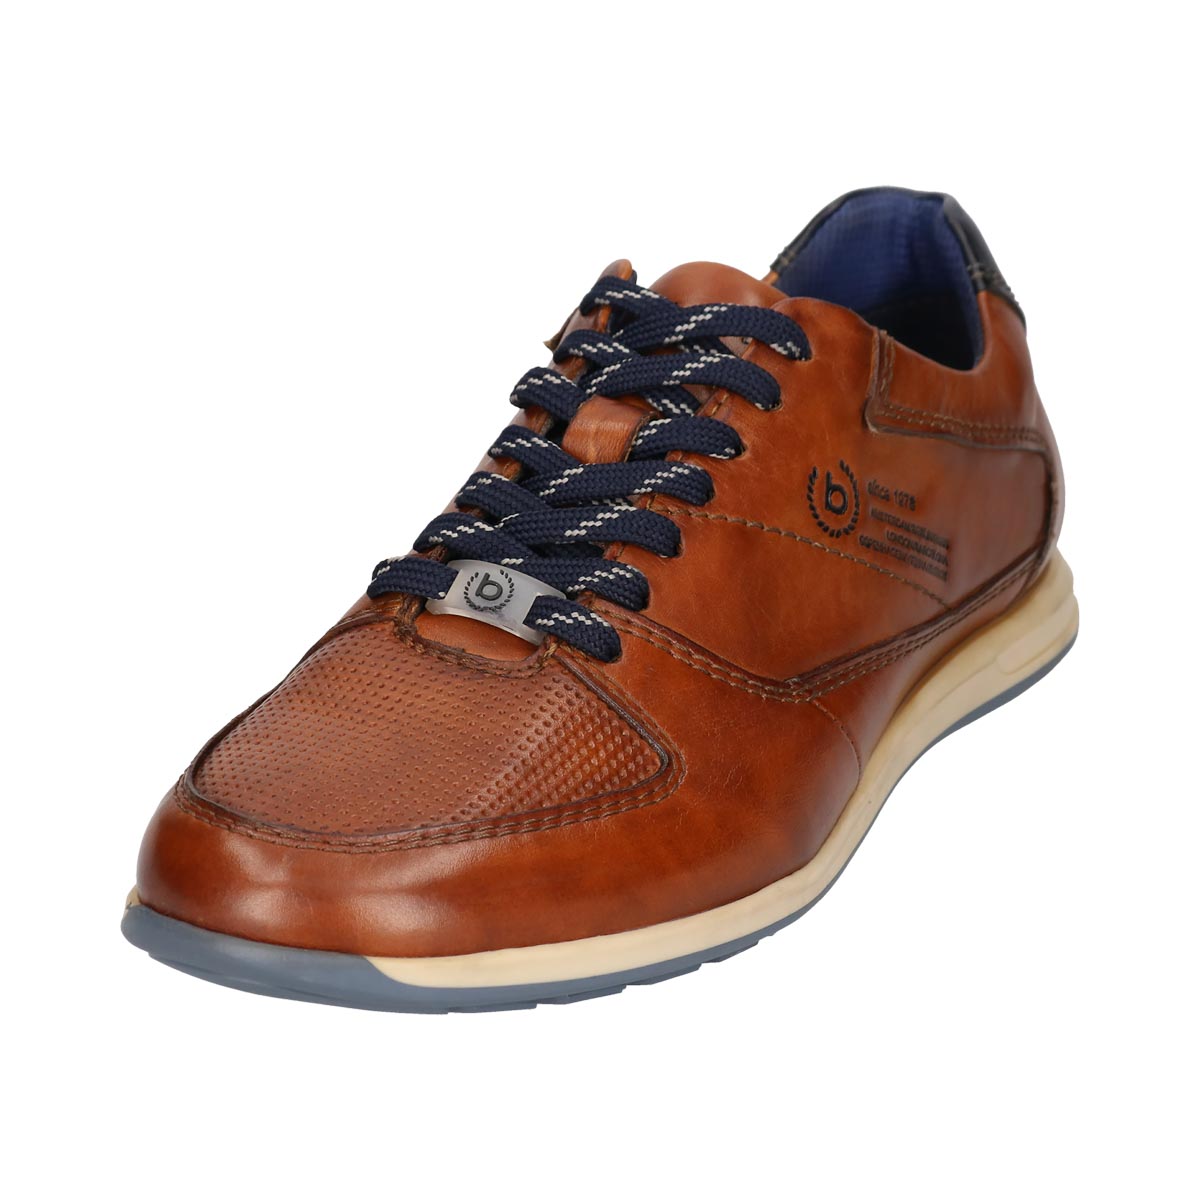 Front view of Bugatti Cognac Leather Sneakers, highlighting the premium leather and lace-up detail.